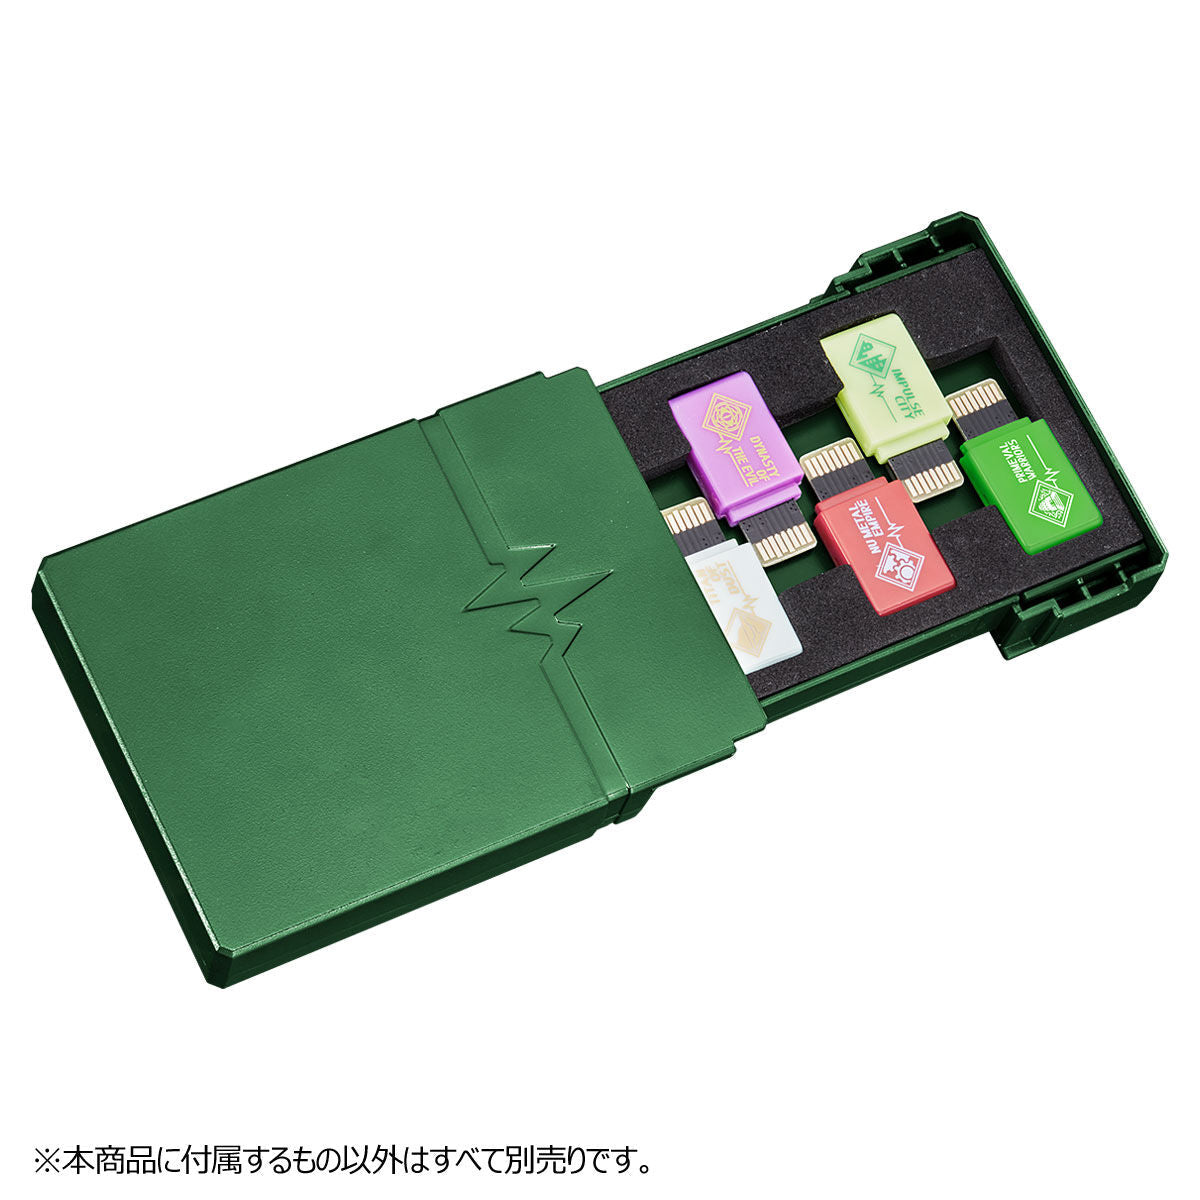 Digimon Vital Breath Digital Monster -DimCARD HOLSTER Vol 2-Bandai-Ace Cards &amp; Collectibles